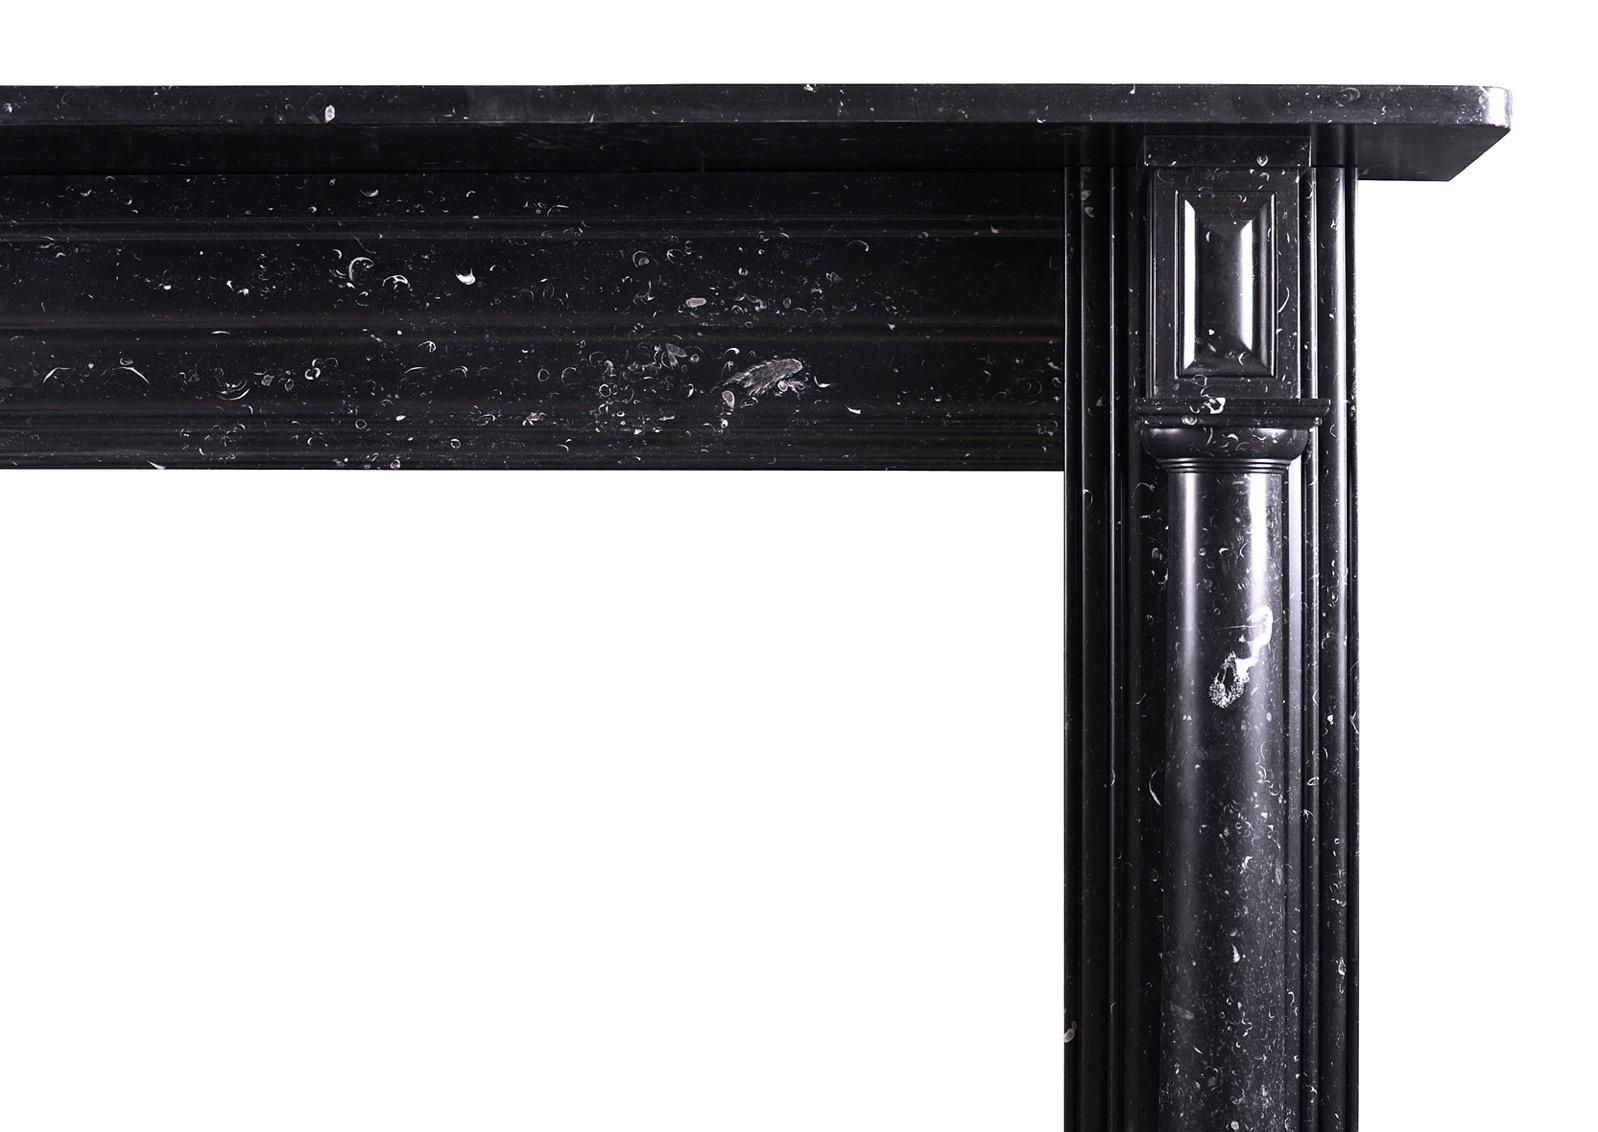 A Black Kilkenny marble Regency fireplace. The jambs with full columns surmounted by panelled end blockings. The reeded frieze with plain shelf above. English, circa 1820. Good quality black marble with characteristic fossils throughout.  

Shelf